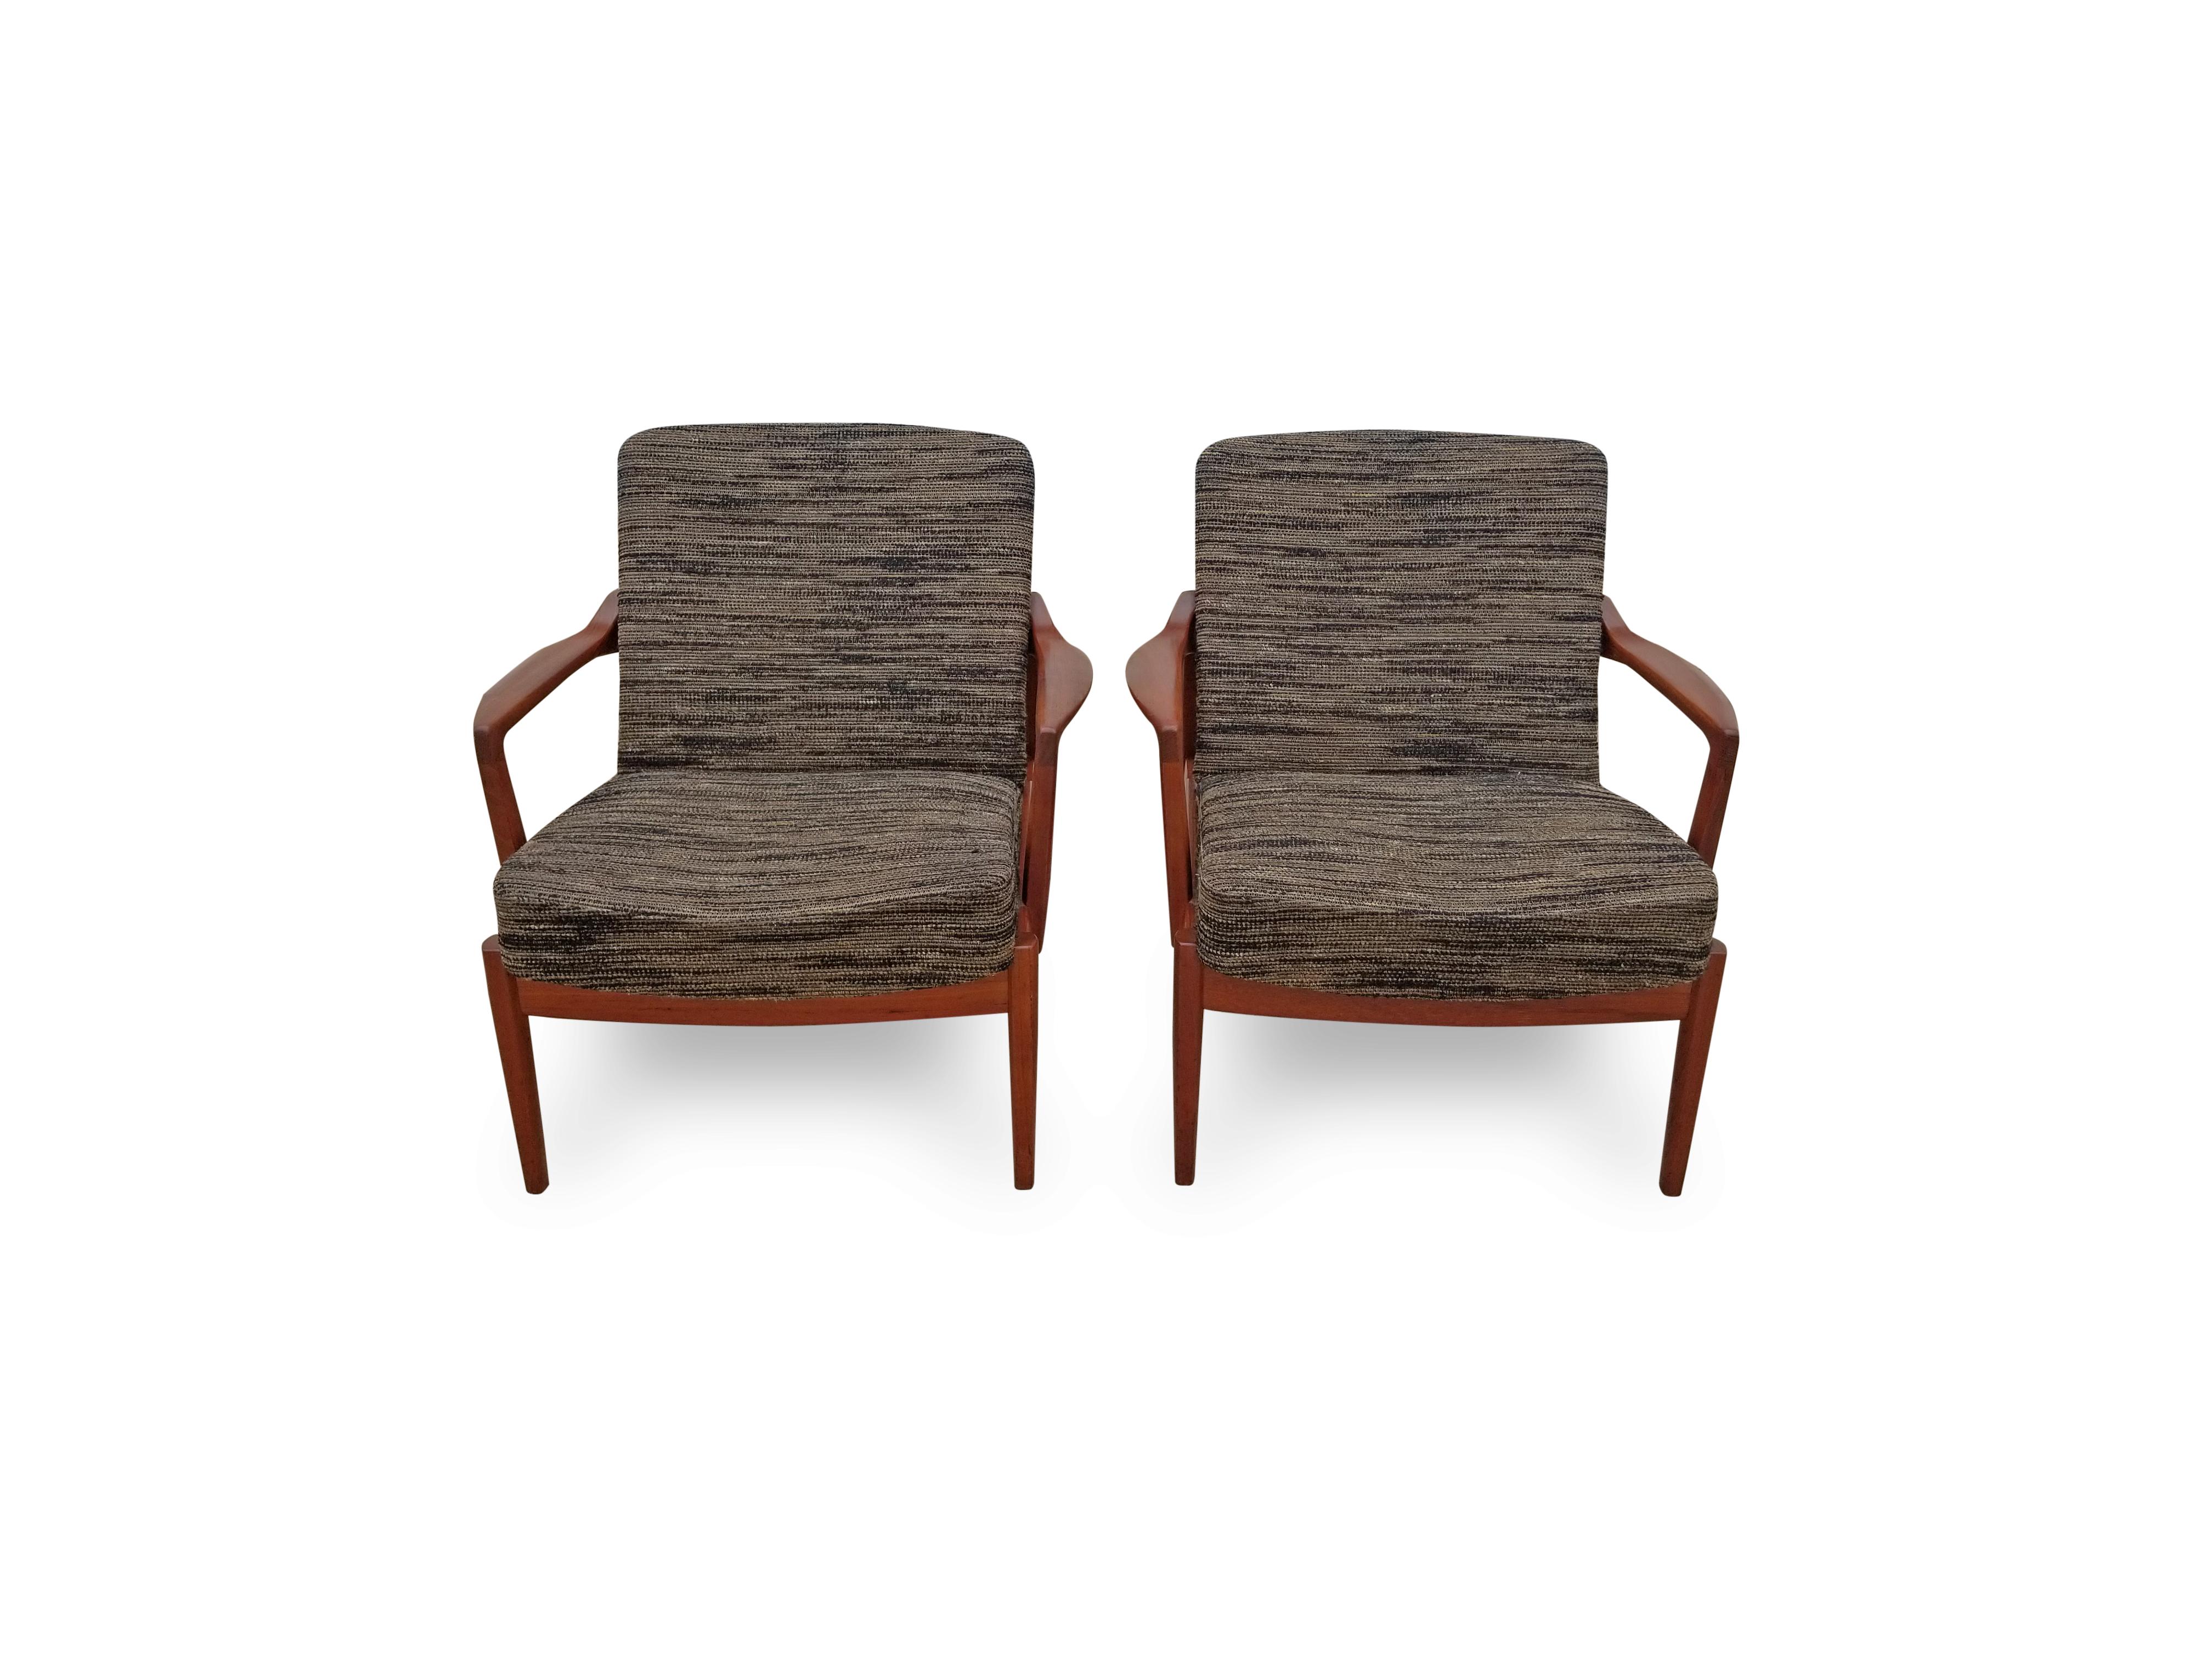 20th Century Pair of Tove and Edvard Kindt-Larsen Lounge Chairs For Sale